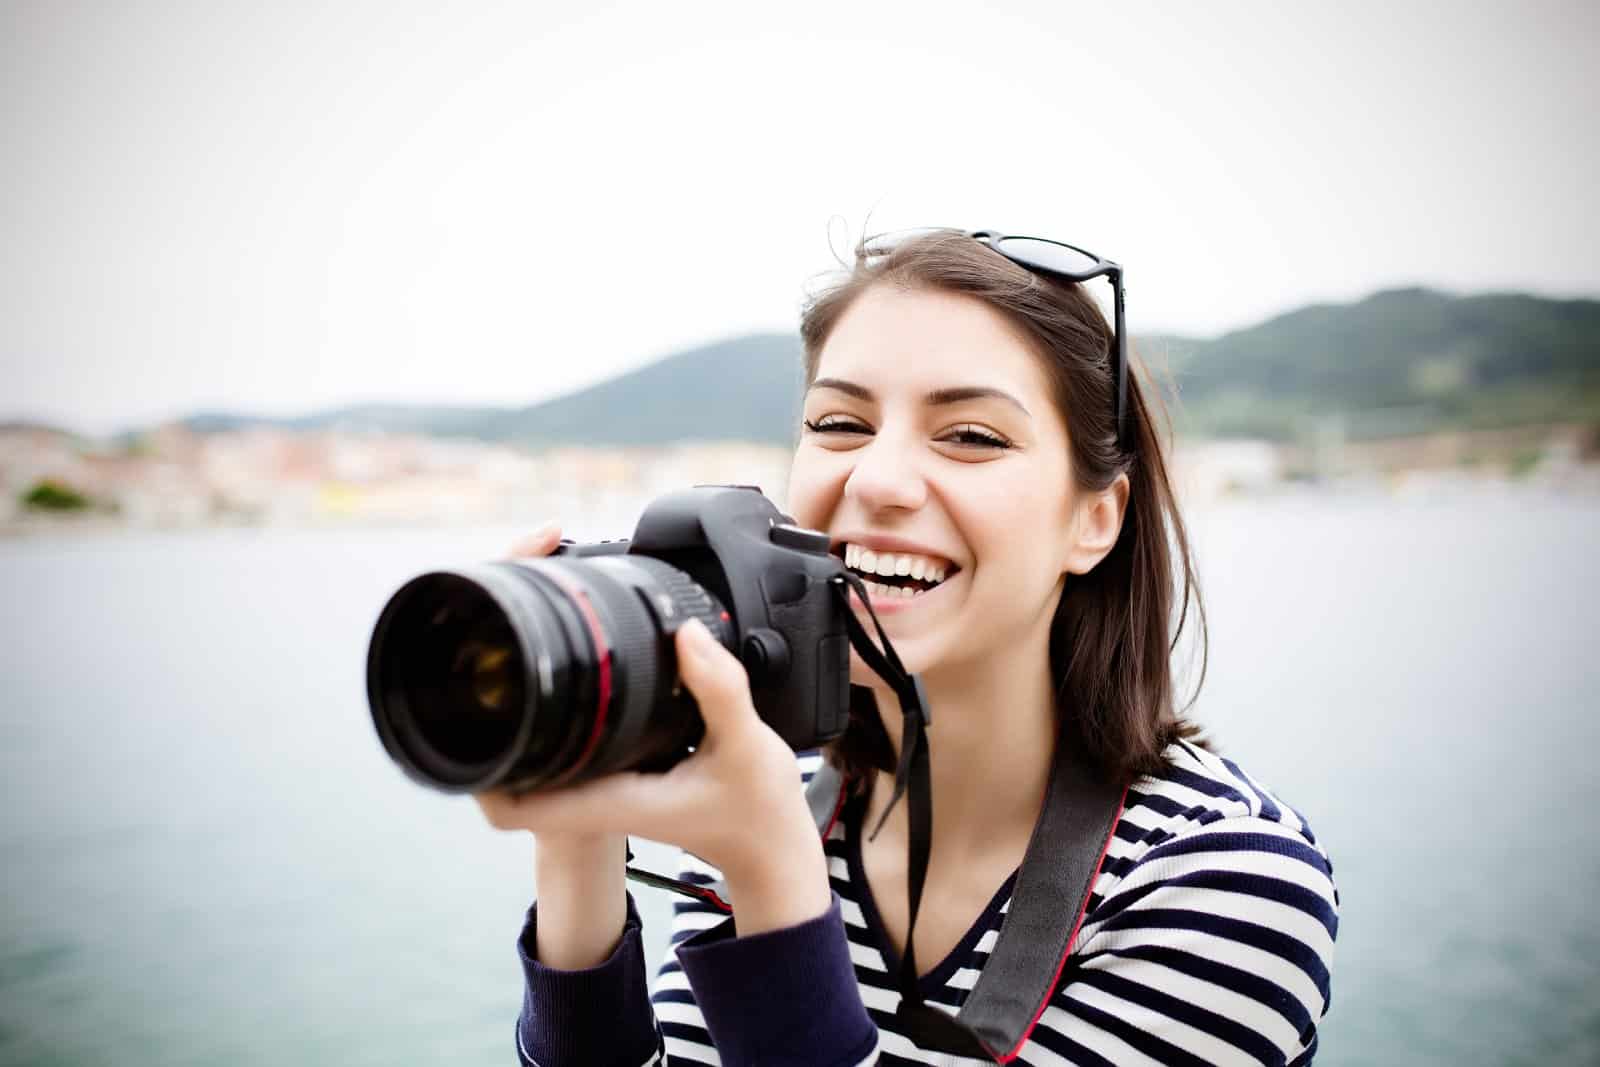 <p class="wp-caption-text">Image Credit: Shutterstock / eldar nurkovic</p>  <p>Capture the moments and memories by documenting your adventures through photos, videos, and journaling. These mementos will not only serve as cherished keepsakes but also fuel nostalgia for future friend reunions.</p>